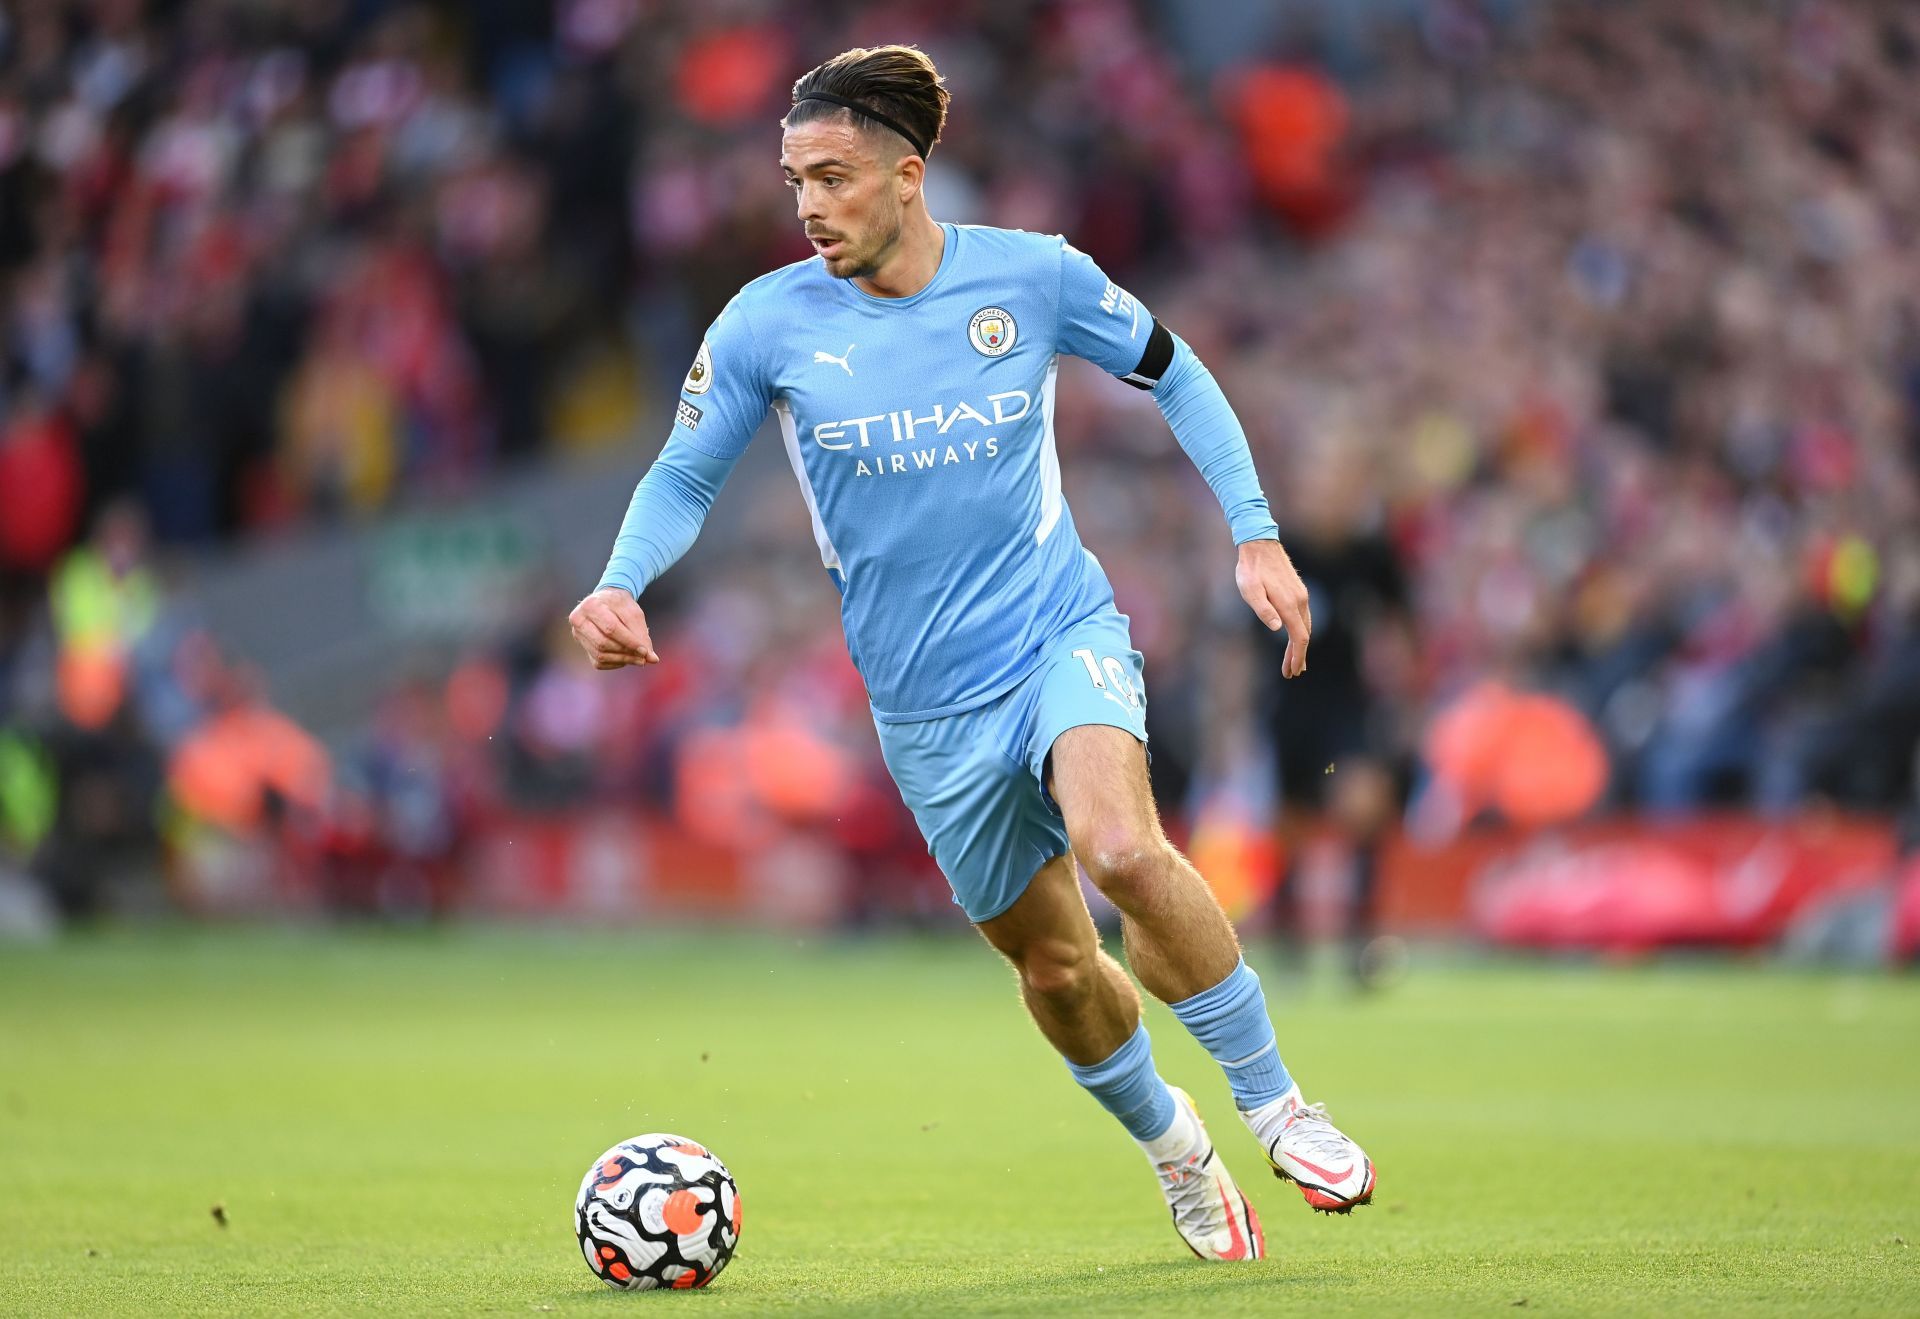 Jack Grealish was acquired by Manchester City this summer.